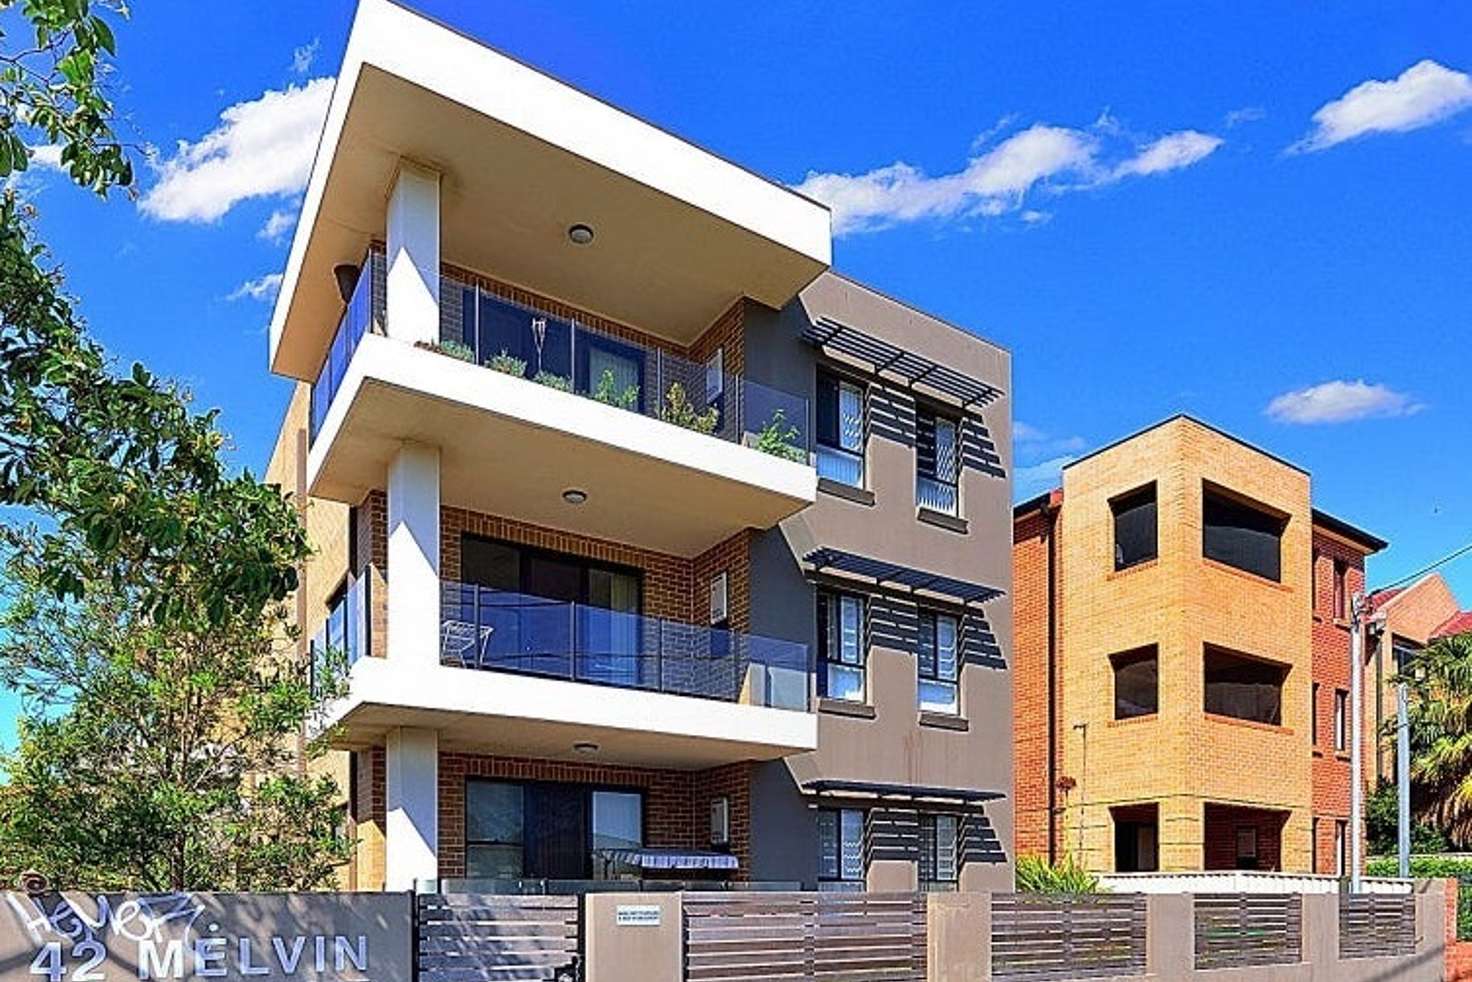 Main view of Homely unit listing, 4/42 Melvin Street, Beverly Hills NSW 2209